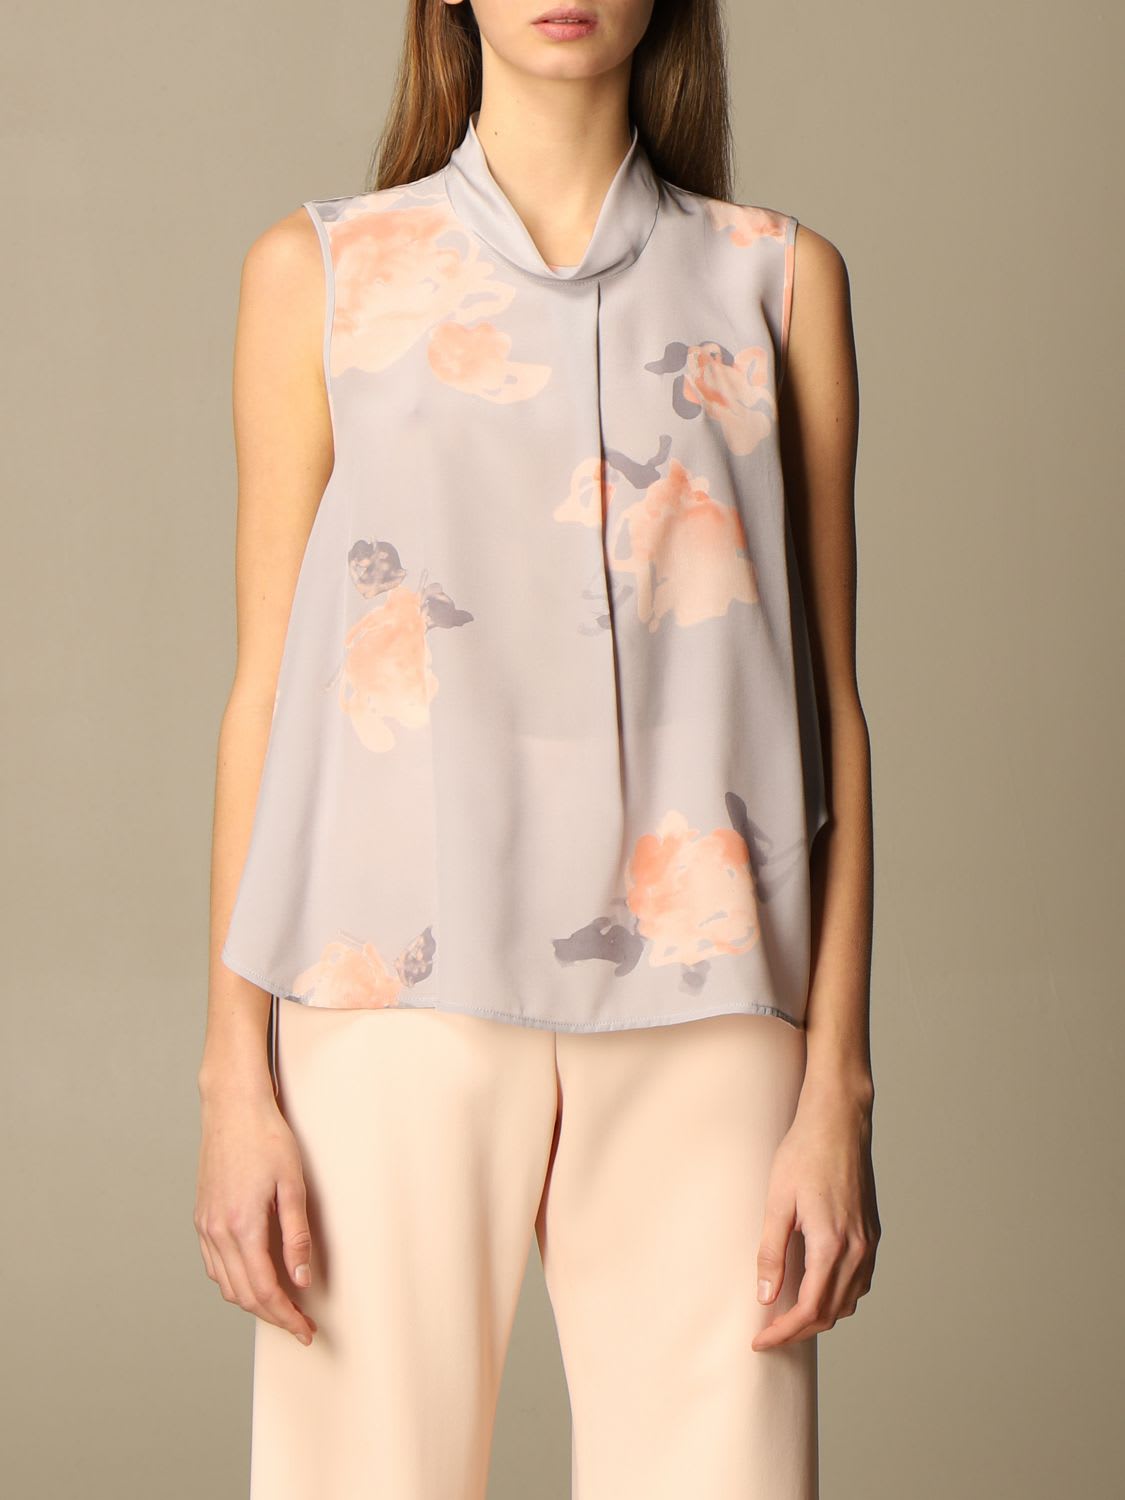 EMPORIO ARMANI SHIRT IN FLORAL PATTERNED SILK,ANK16T A2508 010